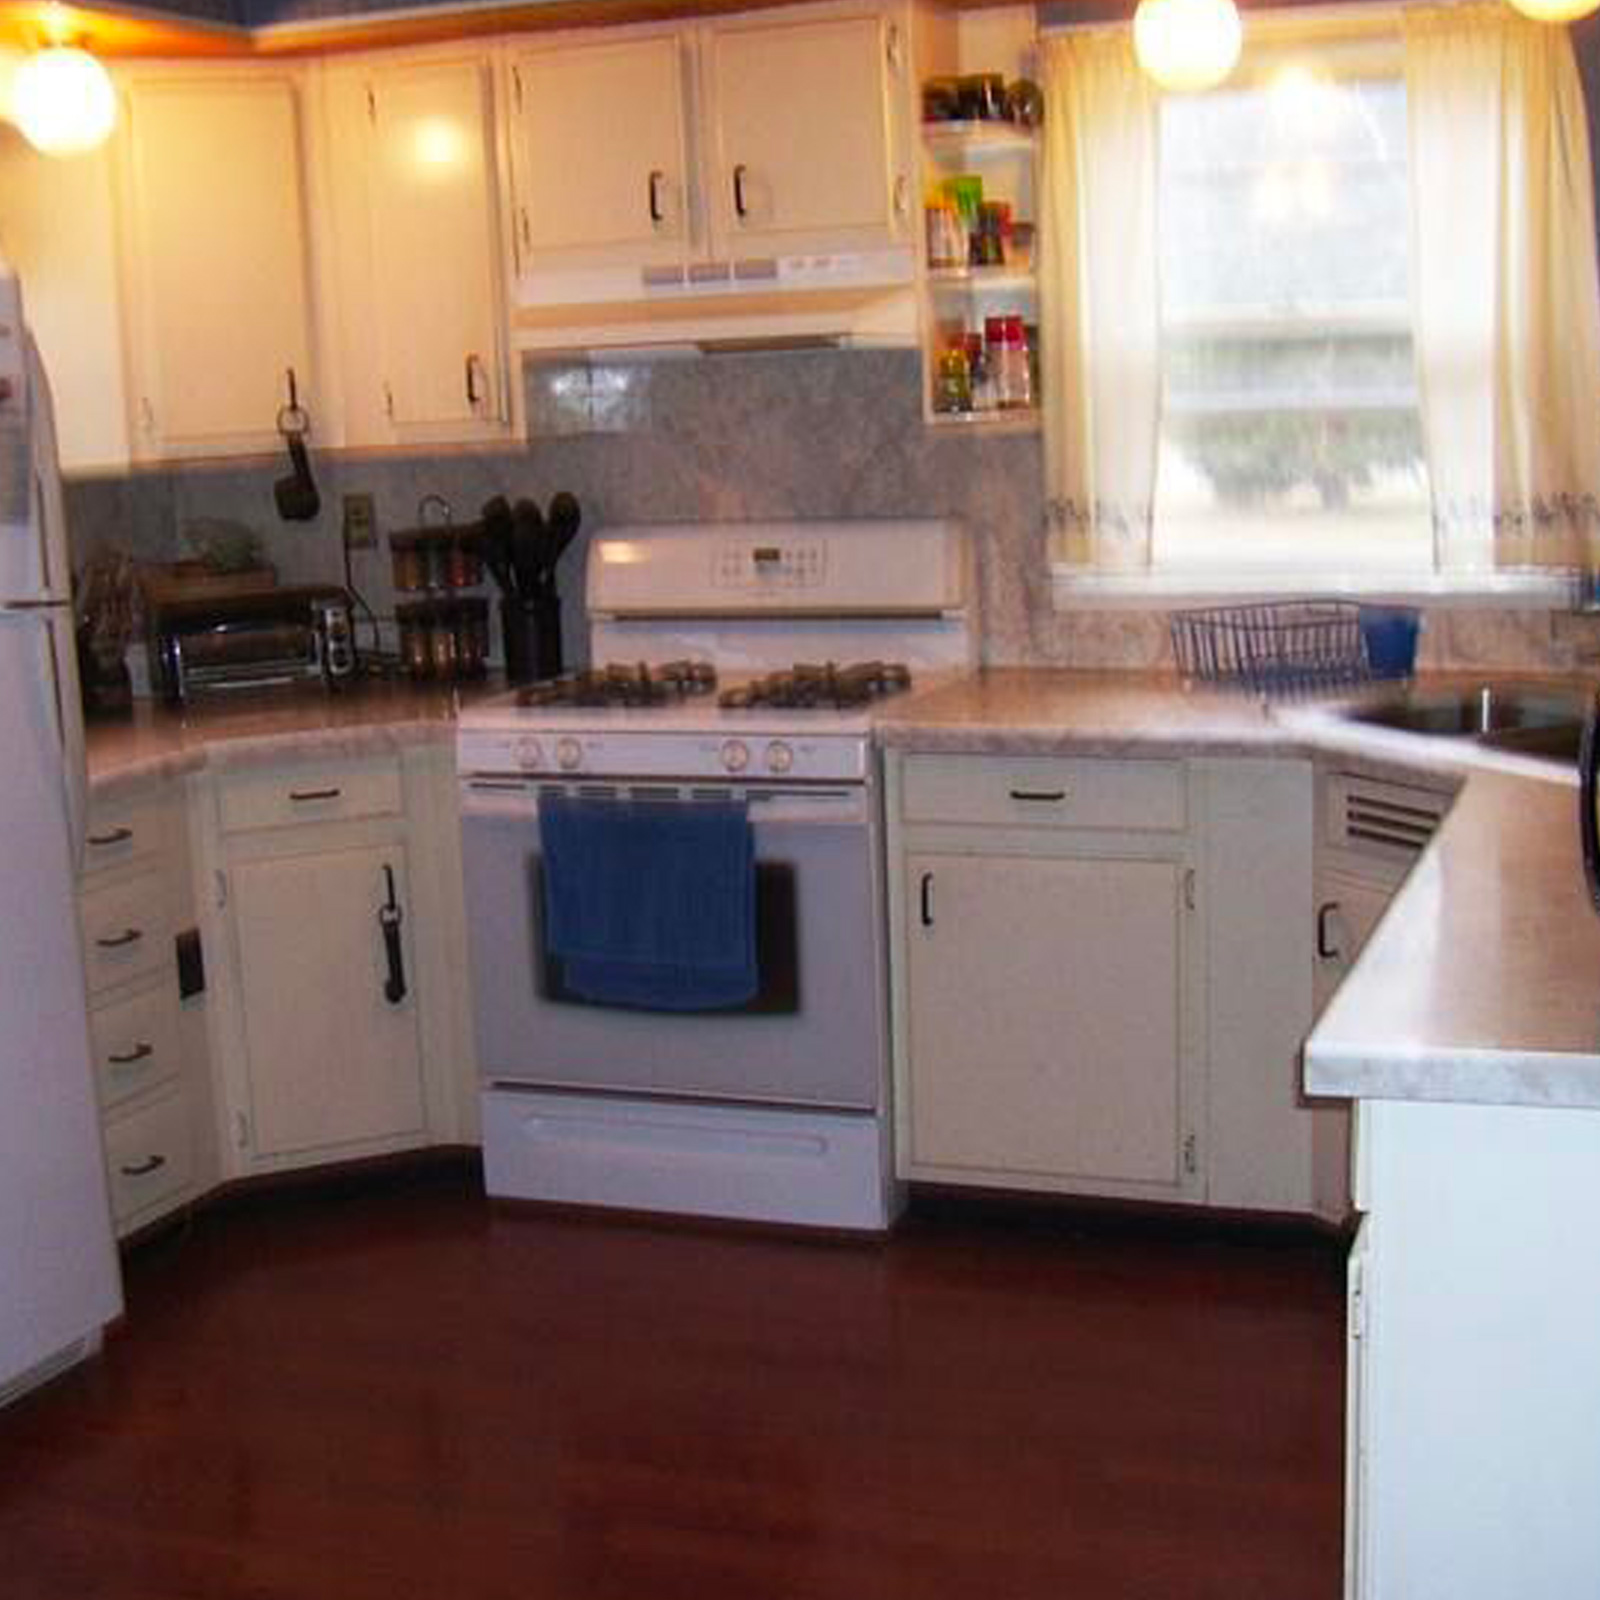 Entry 81 - This outdated kitchen is in definite need of a makeover